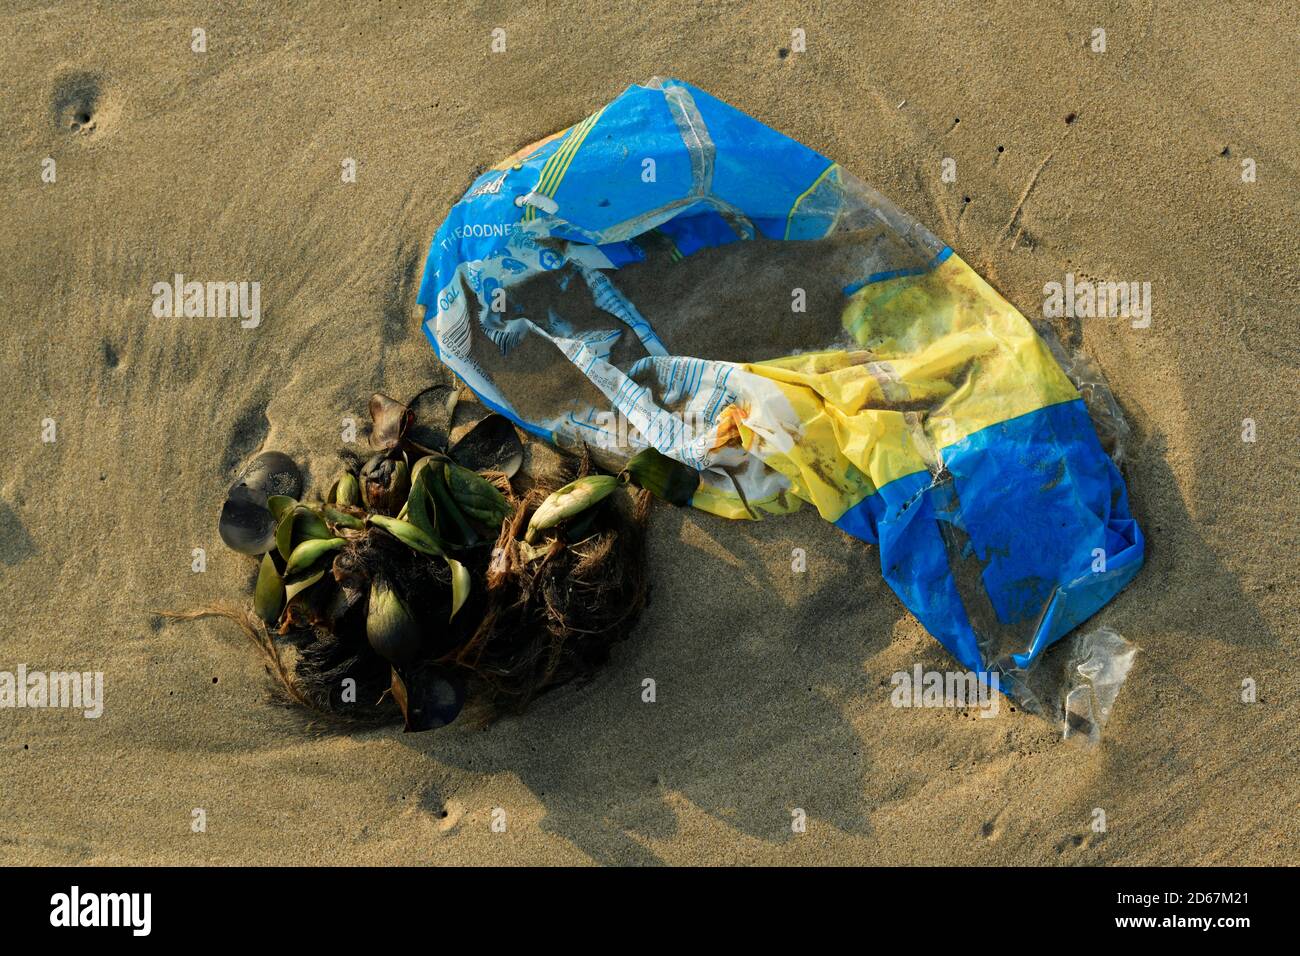 Plastic pollution, empty bread packet washed up on beach, food packaging, Durban, South Africa, waste management, HDPE bag, litter, close up, rubbish Stock Photo